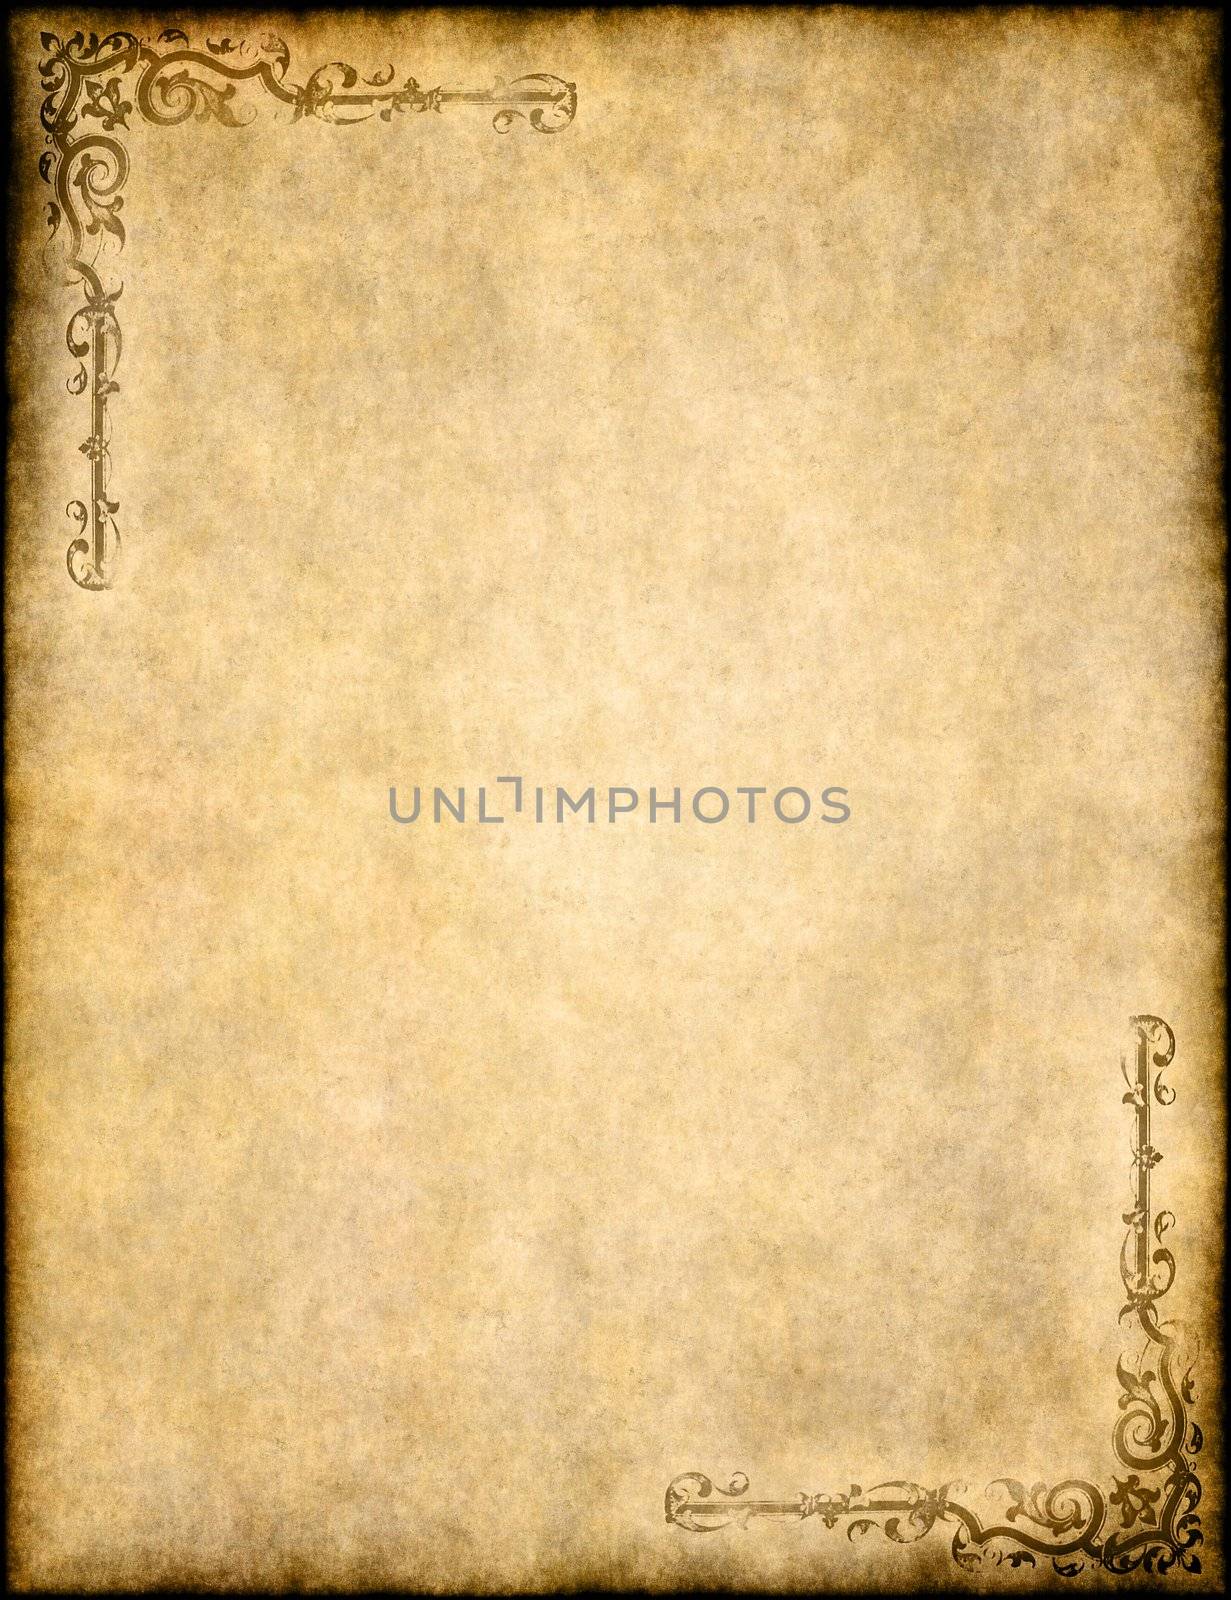  old parchment paper texture with ornate design by clearviewstock